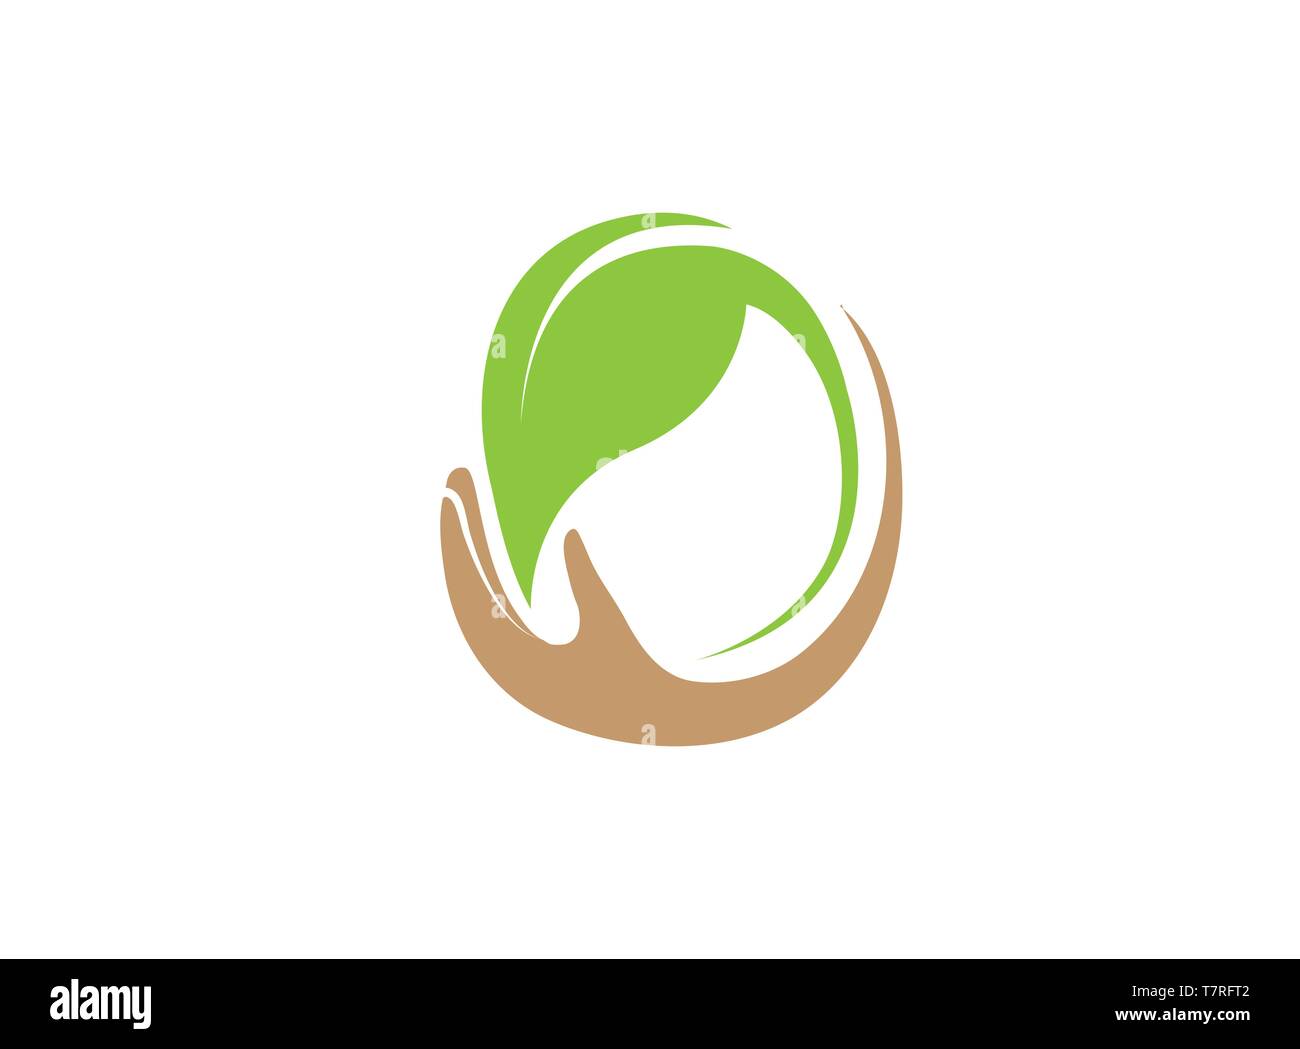 Hand and leaf for plant care and nature logo design illustration, nature face icon, a symbol on white background Stock Vector